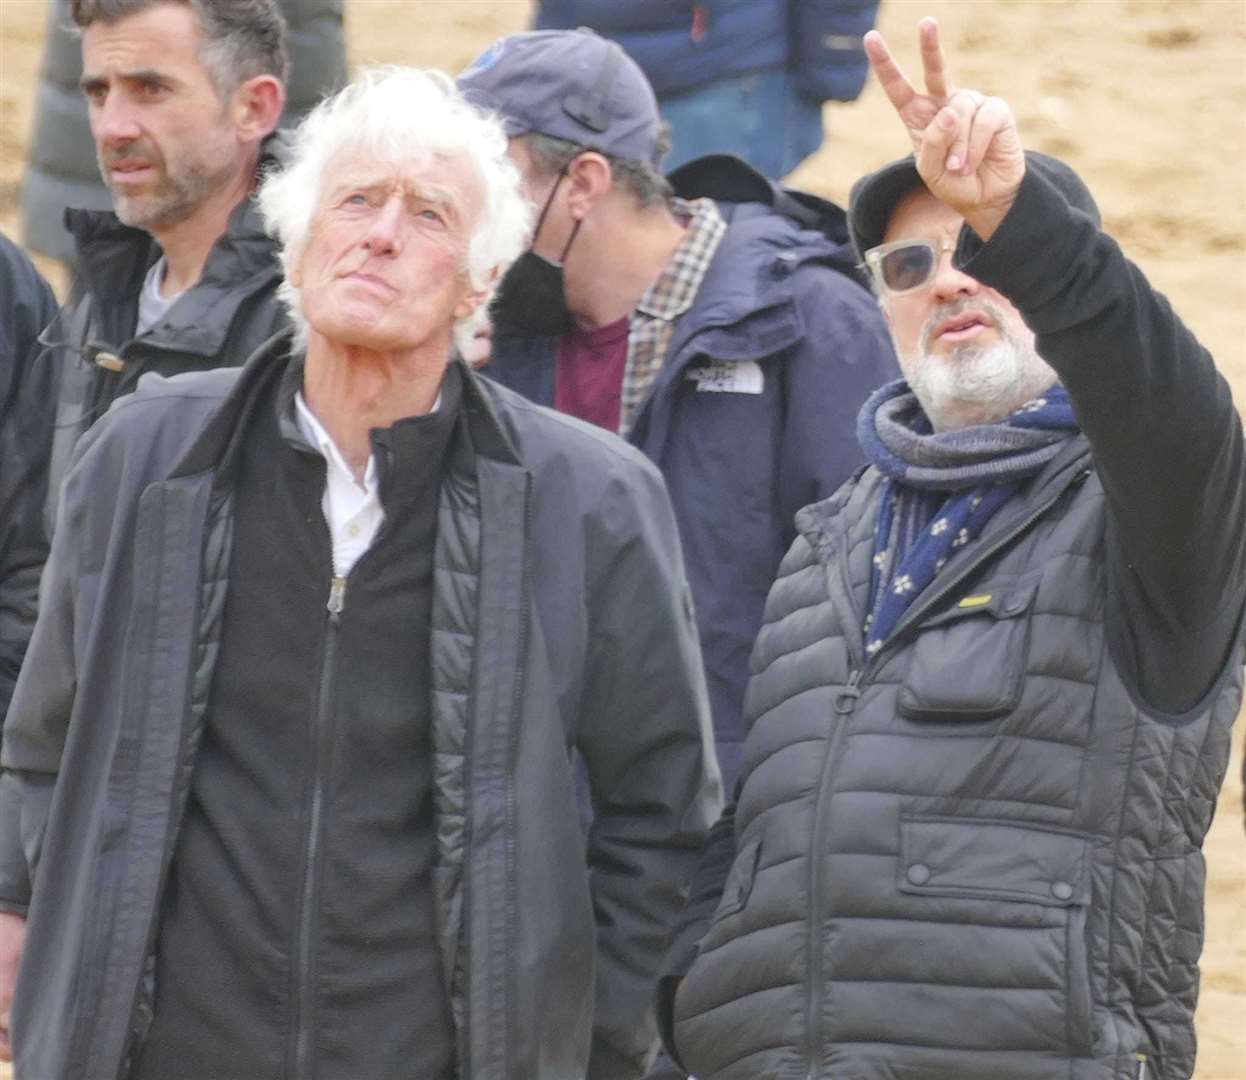 Roger Deakins and Sam Mendes survey the scene on Margate seafront. Picture: Frank Leppard